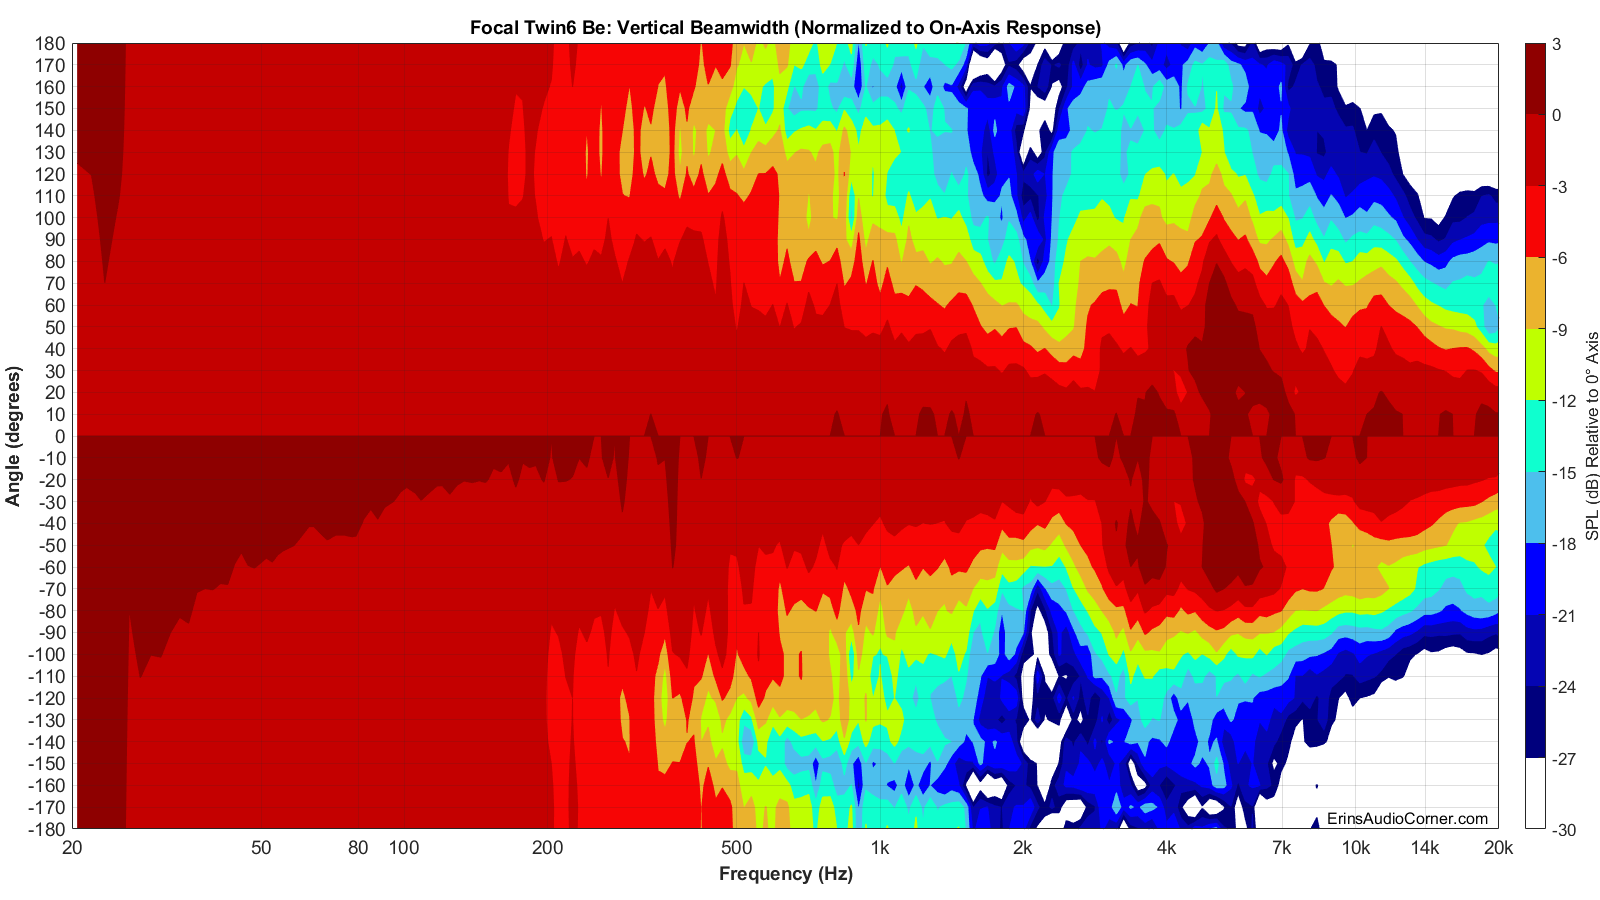 Focal%20Twin6%20Be%20Beamwidth_Vertical.png